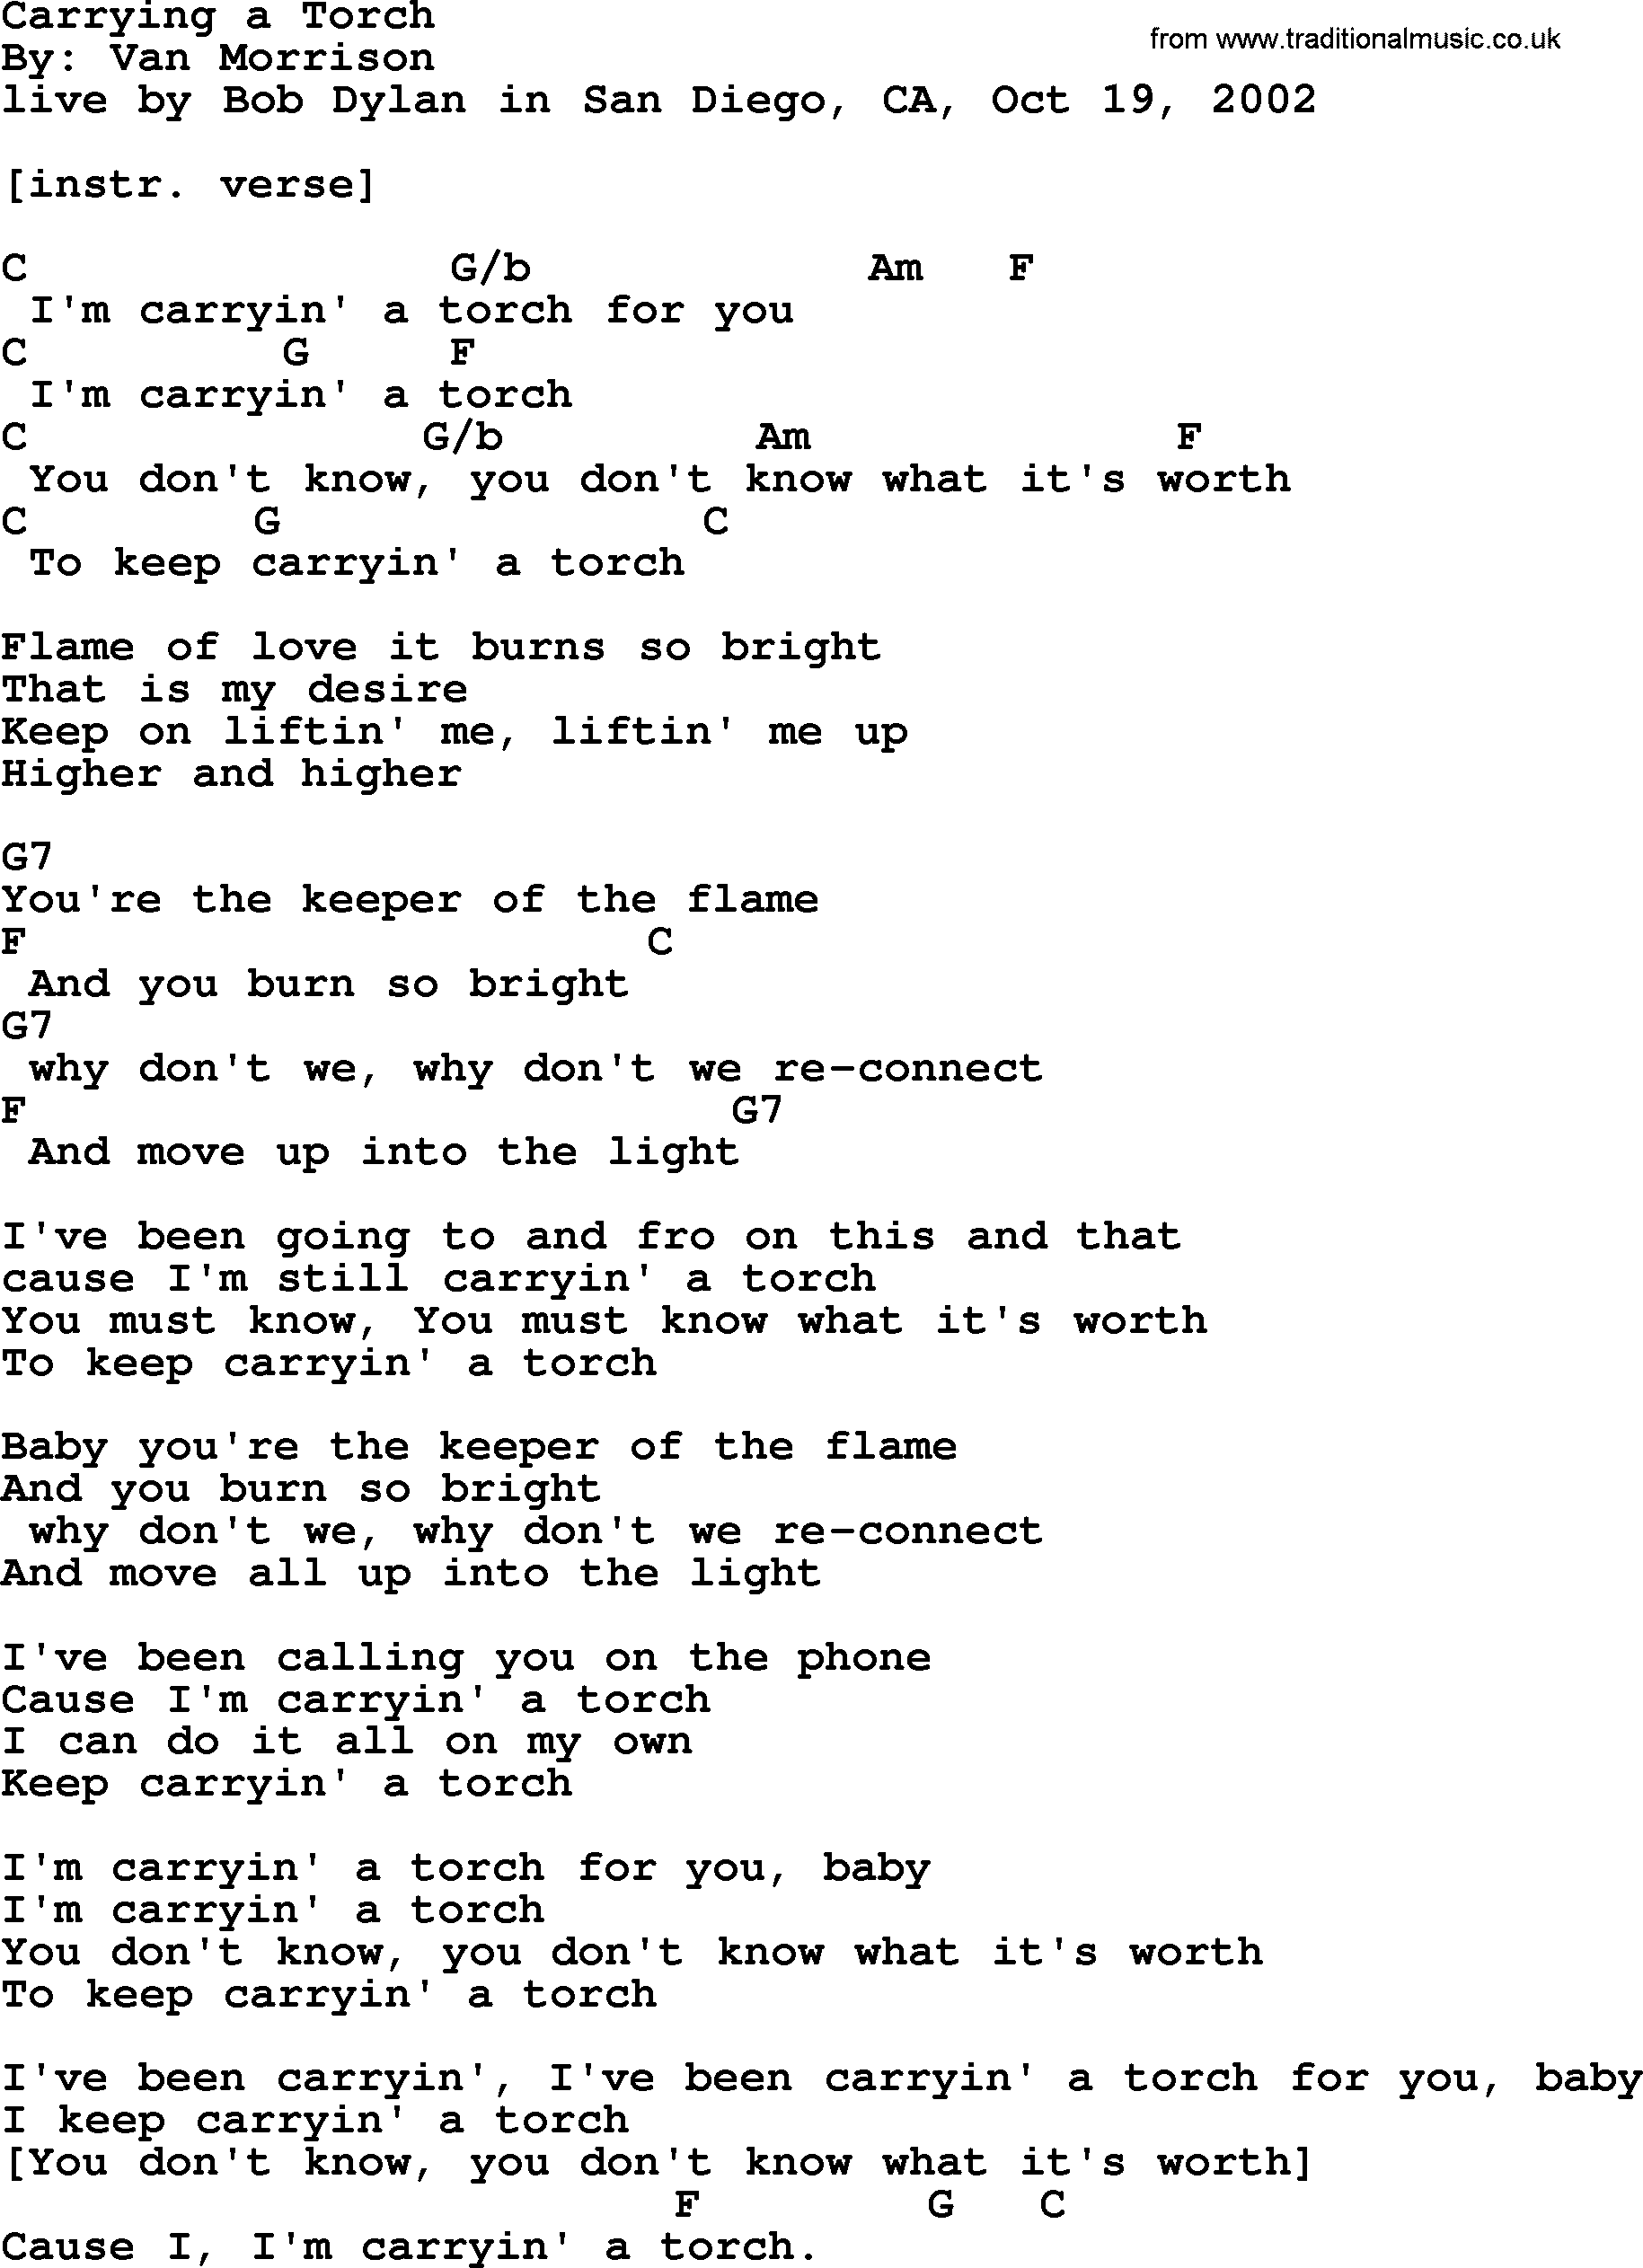 Bob Dylan song, lyrics with chords - Carrying a Torch